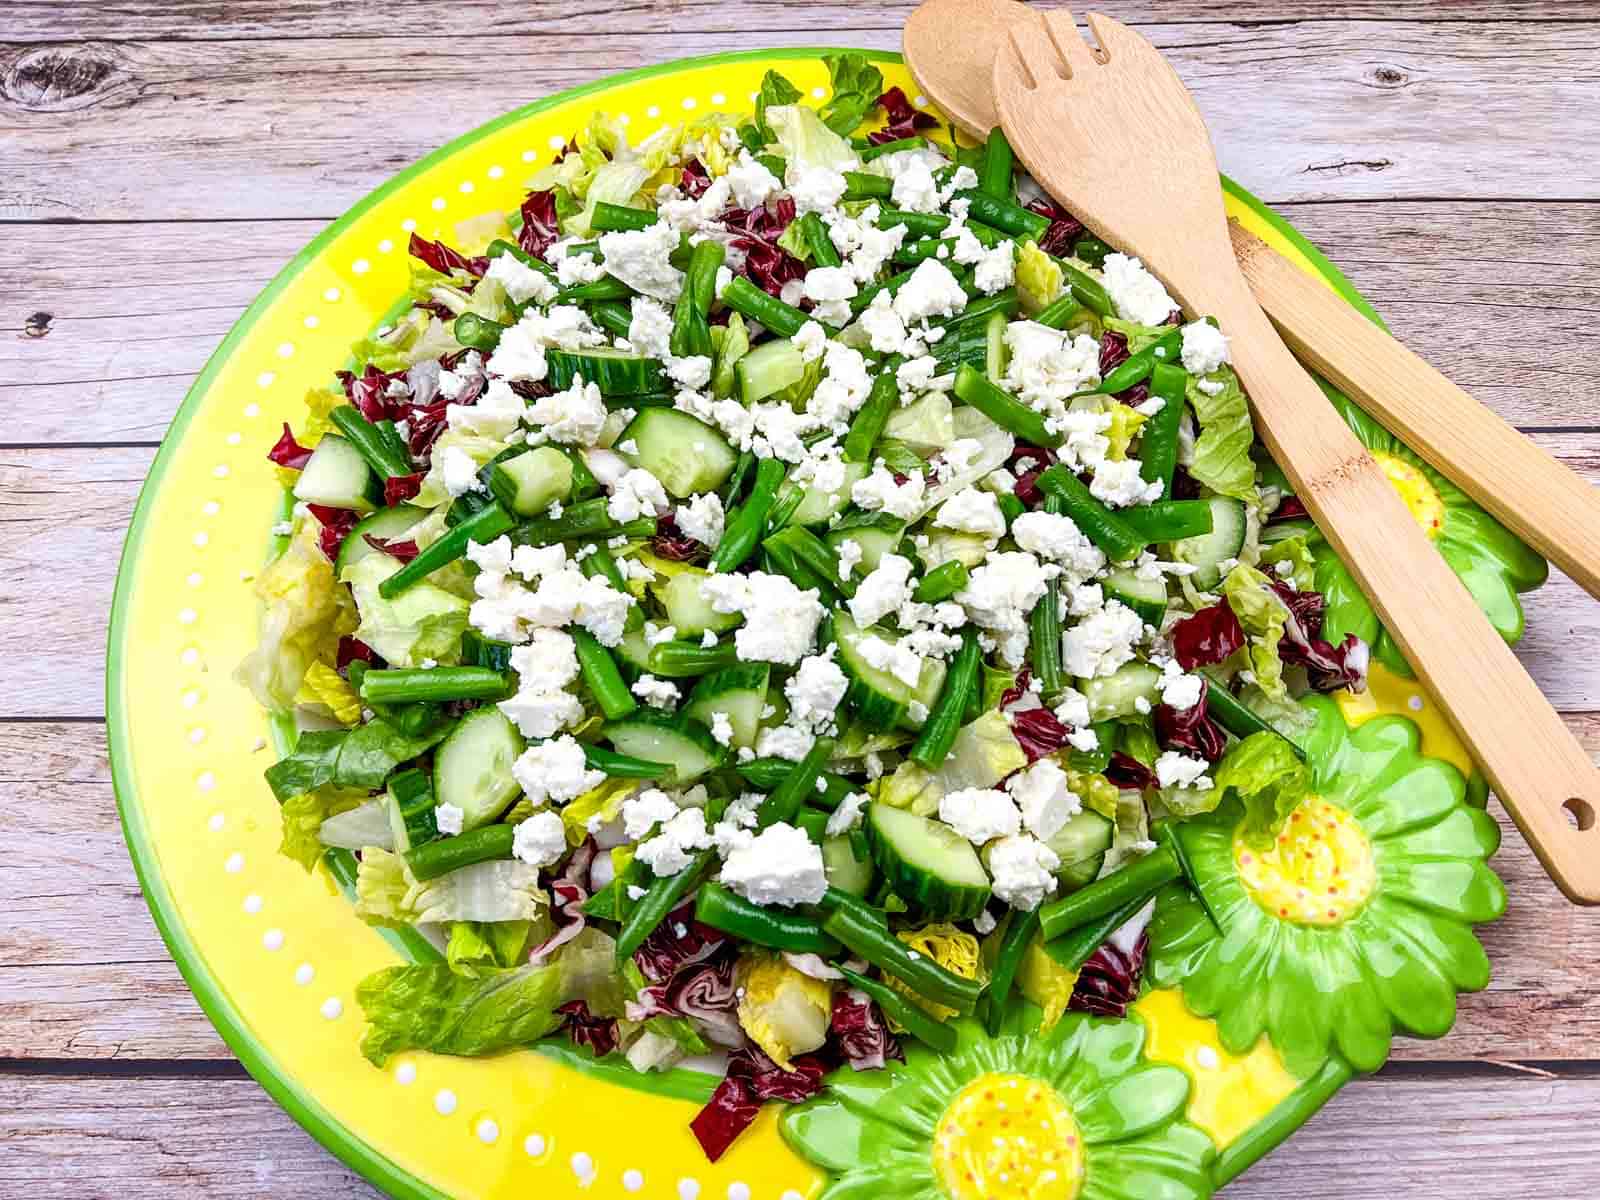 <p>Mediterranean Chopped Salad is a medley of crisp veggies cut to perfection. It embodies the sunny flavors of the Mediterranean coast. Each forkful is brimming with freshness and bold in simplicity. It’s a wonderful addition to any summer meal.<br><strong>Get the Recipe: </strong><a href="https://dinnerbyheather.com/mediterranean-chopped-salad/?utm_source=msn&utm_medium=page&utm_campaign=">Mediterranean Chopped Salad</a></p>